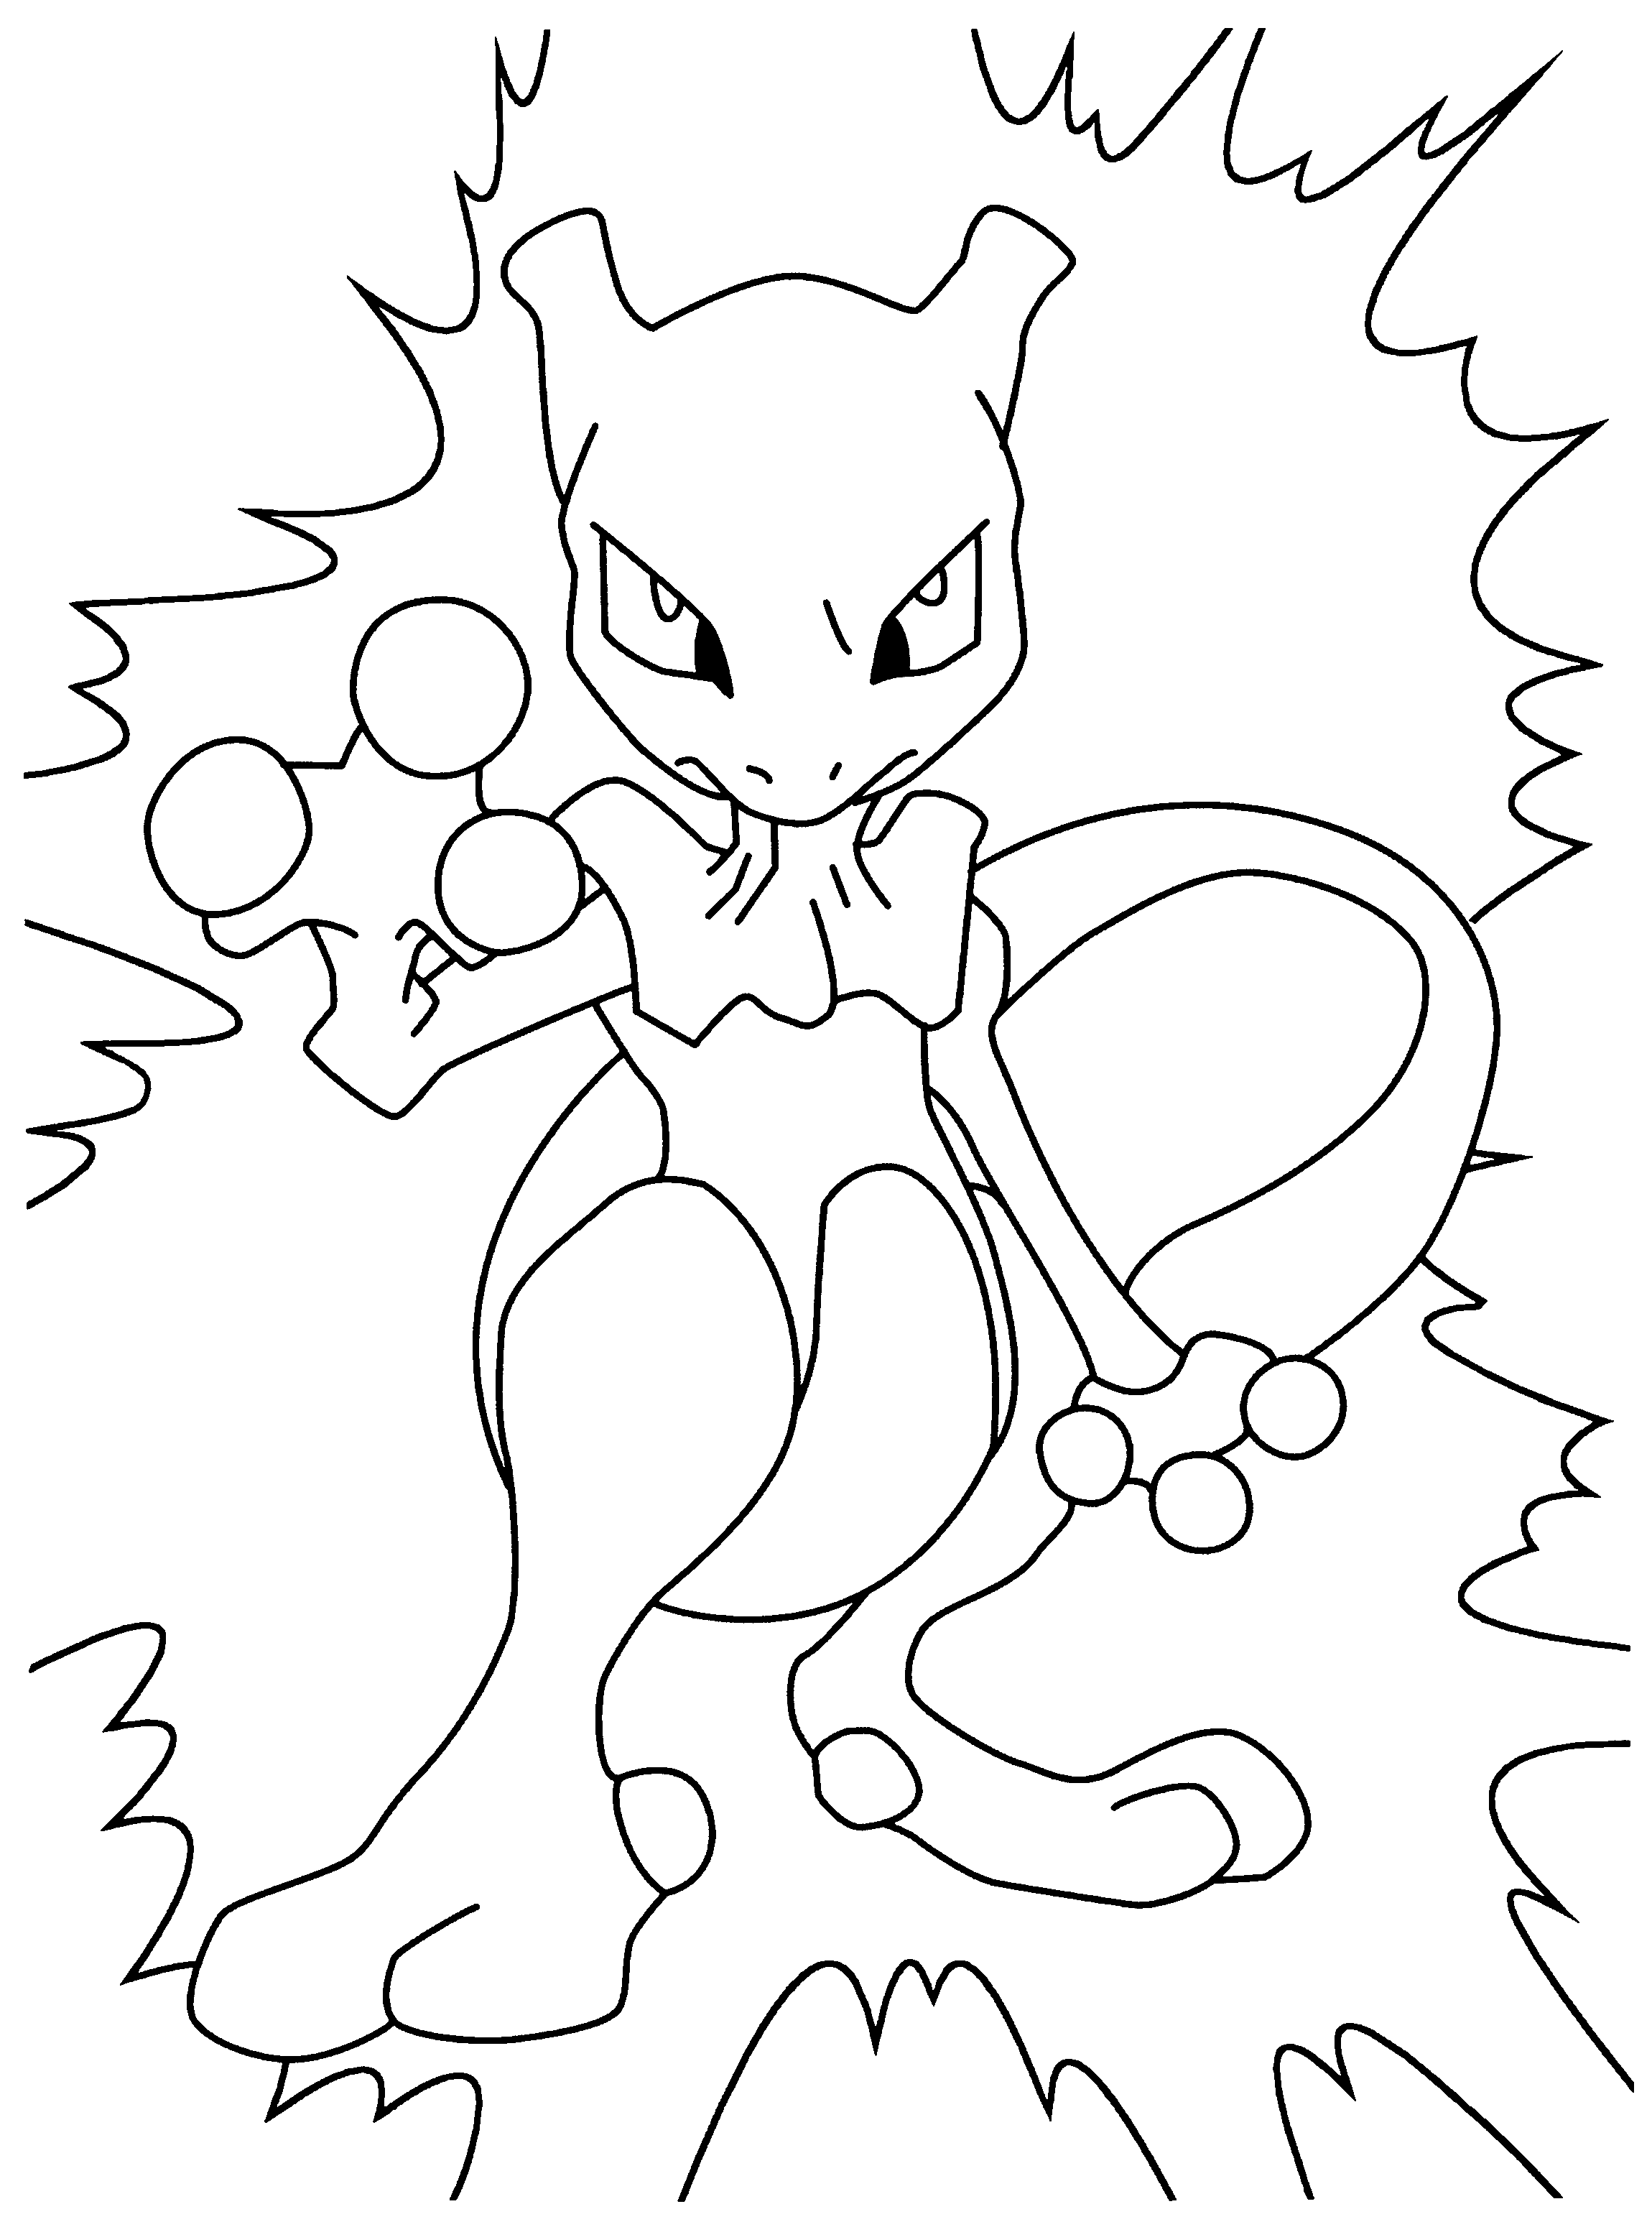 Pokemon coloring pages | Kids coloring pages | #22